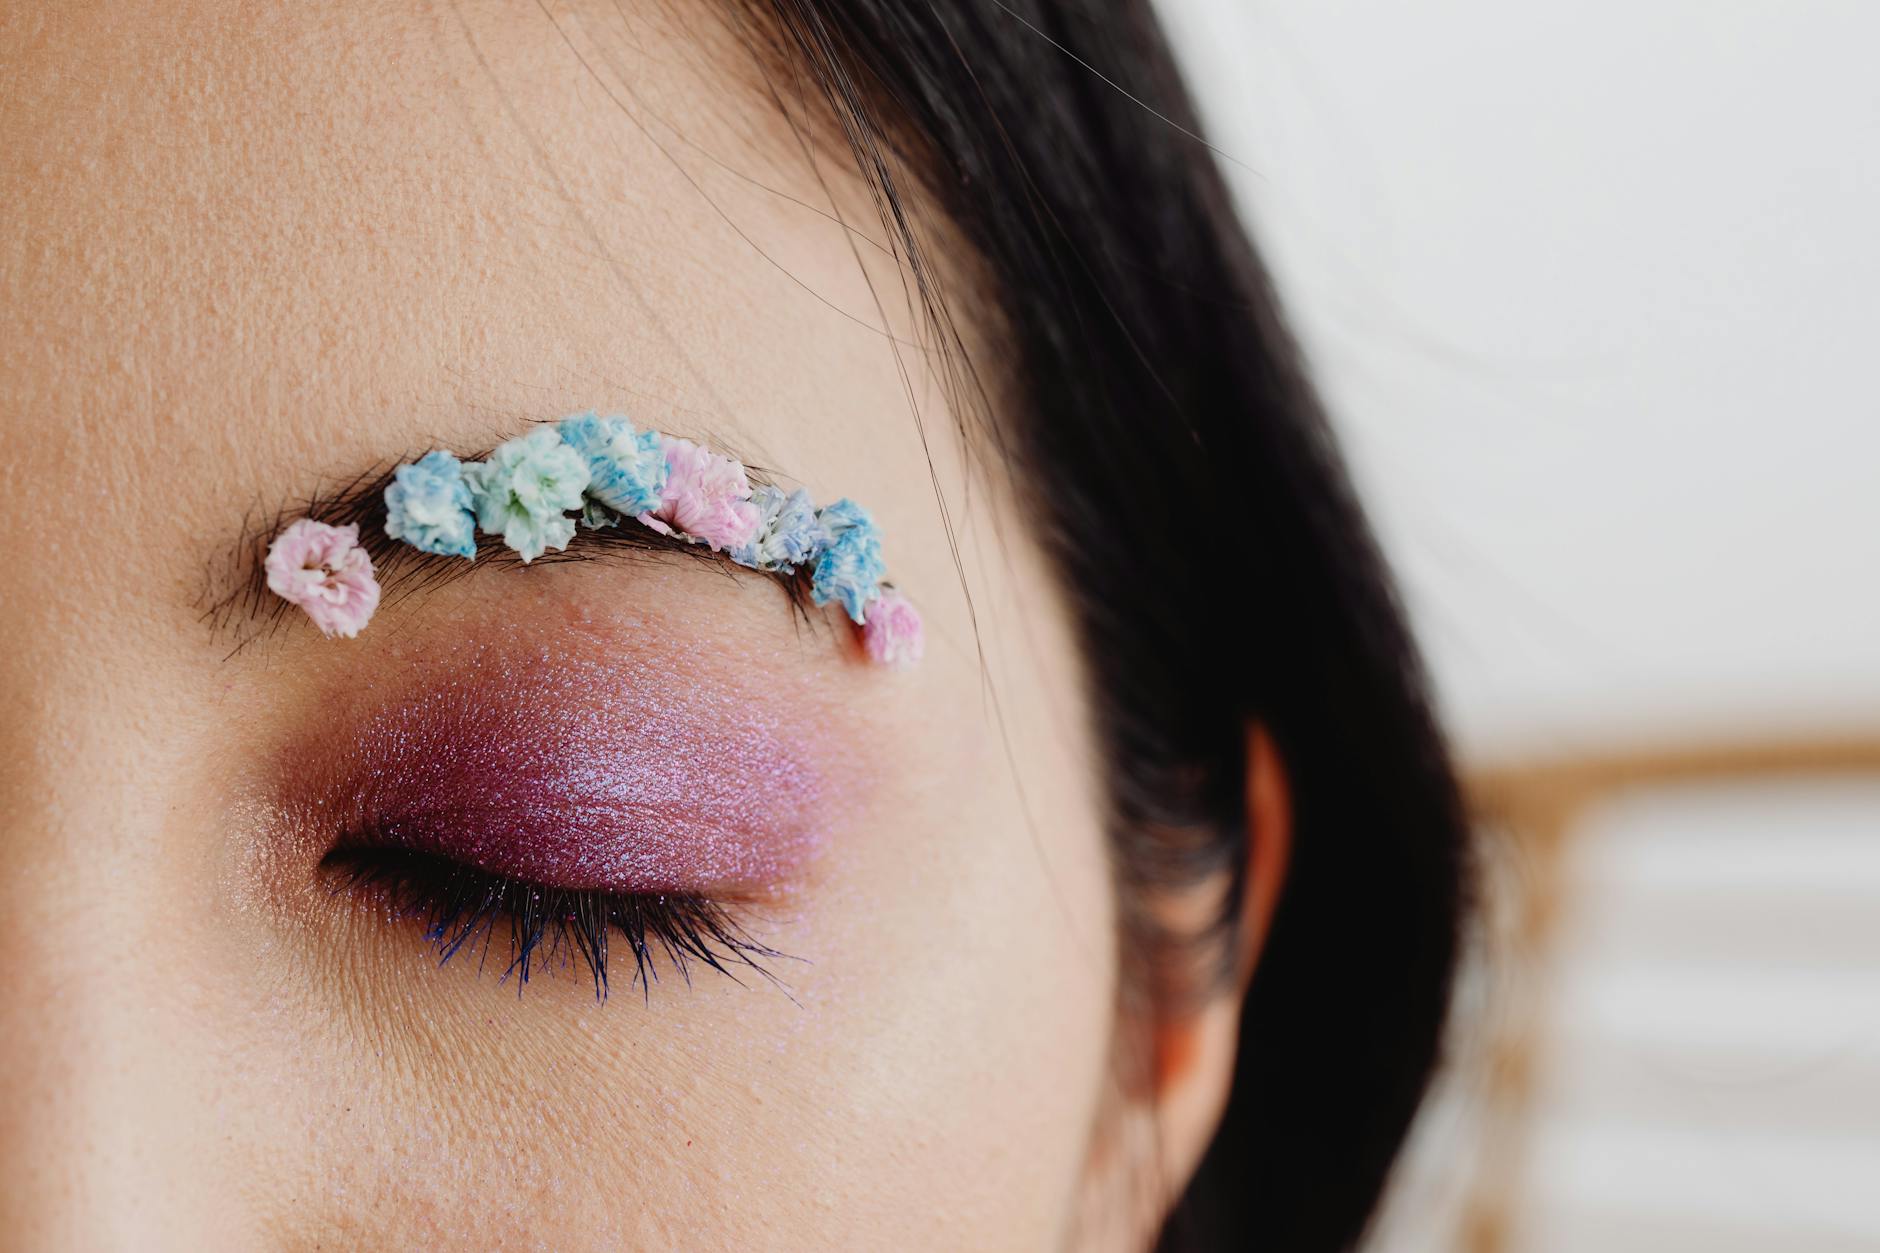 close up photo of a person with glittery eye makeup